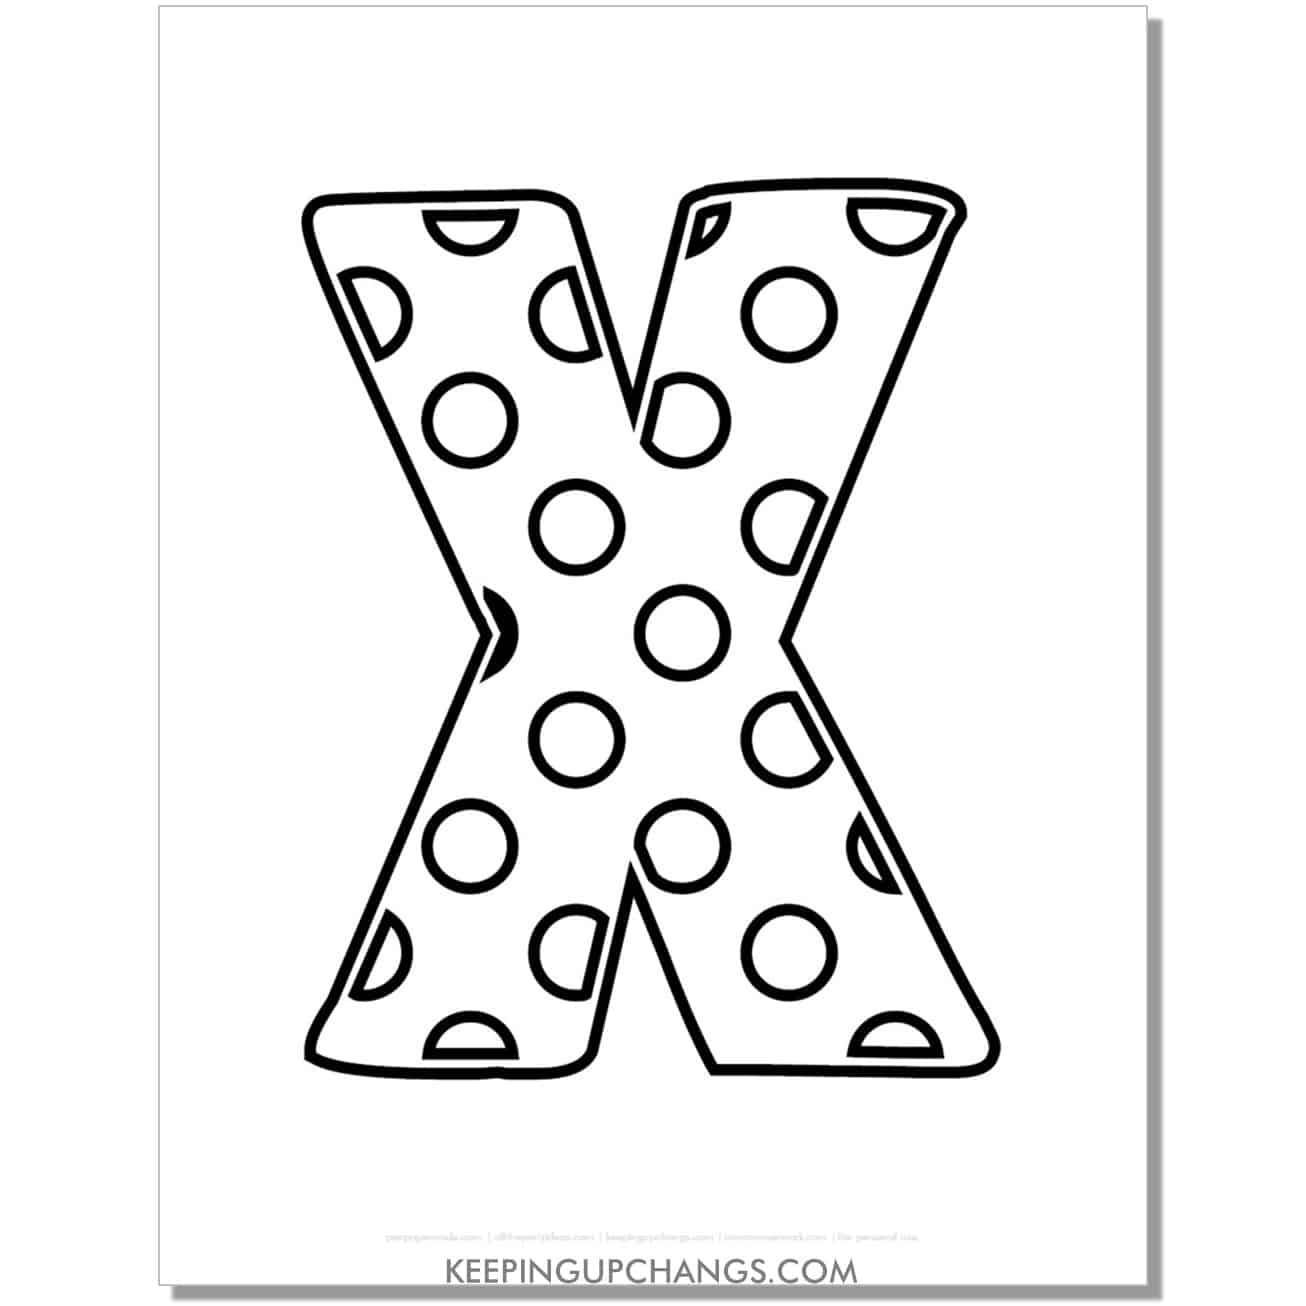 free alphabet letter x coloring page with polka dots for toddlers, preschool, kindergarten.